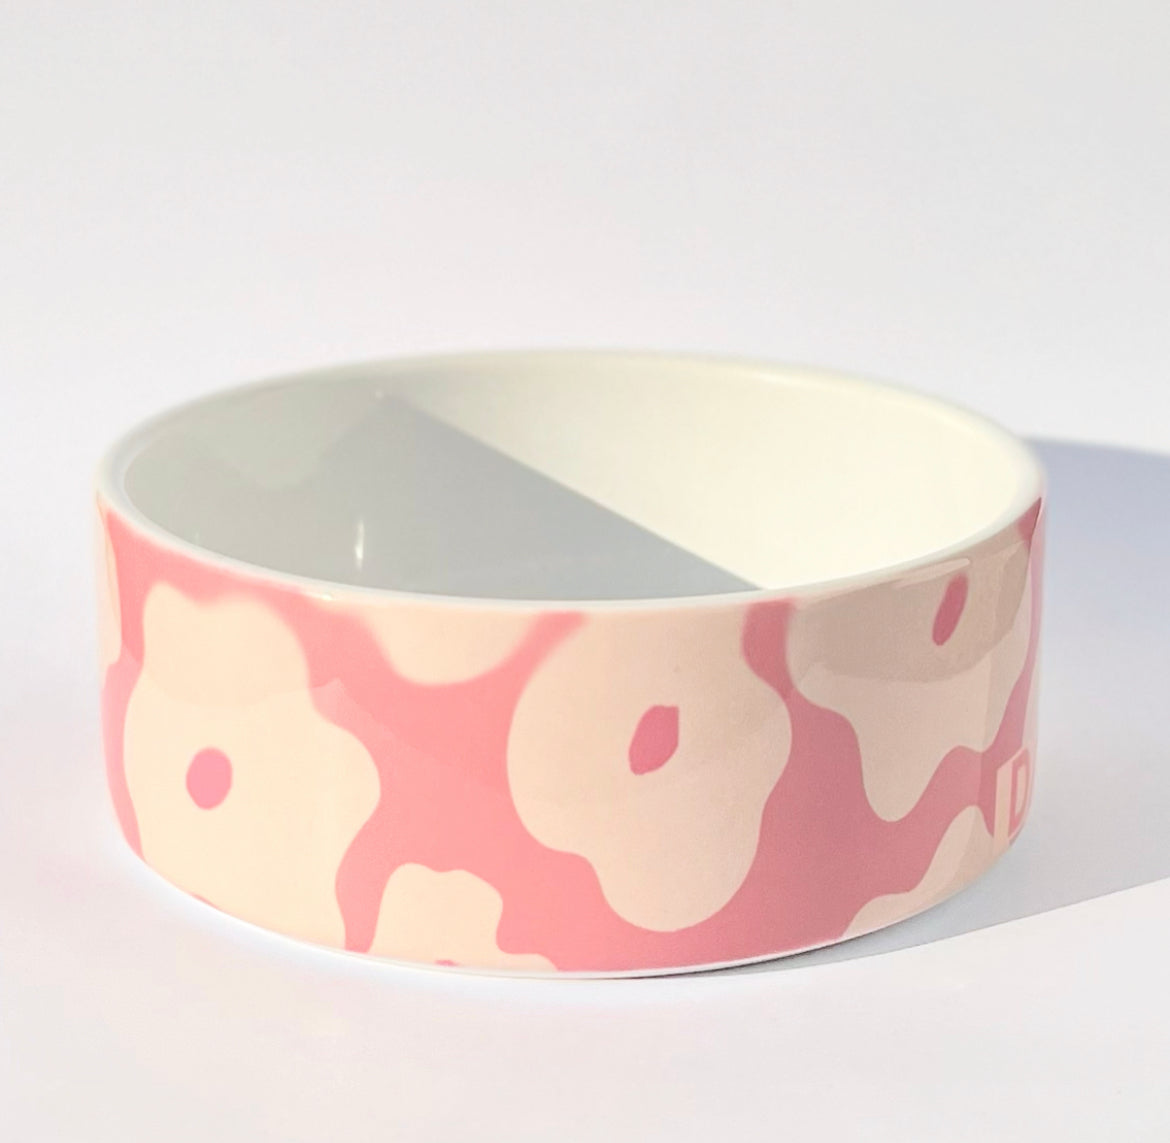 Personalised Ceramic Pet Bowl - Add your pets name - 2 sizes